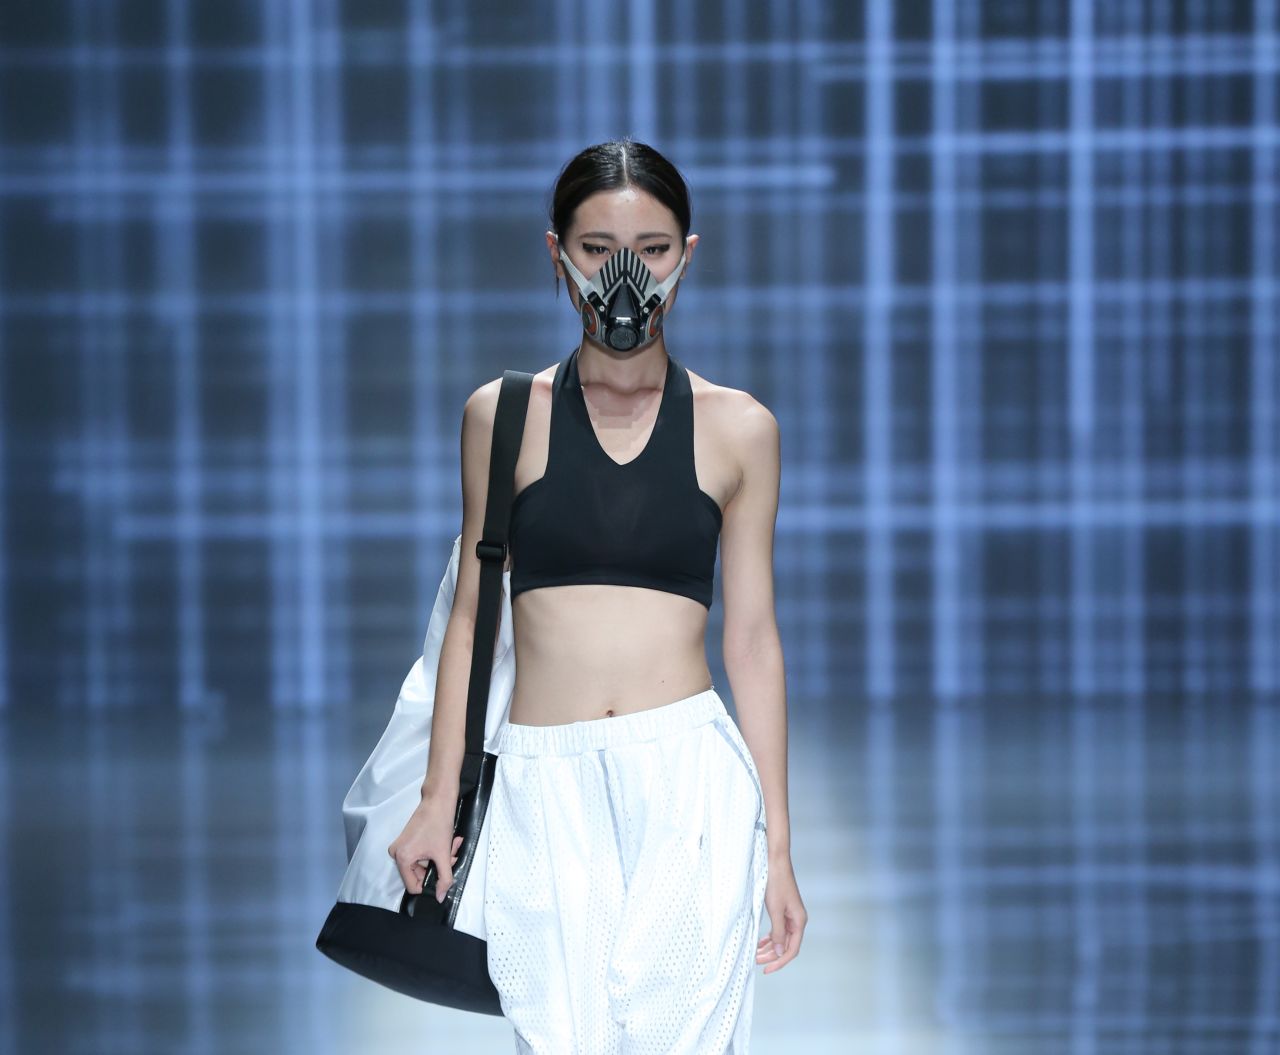 Fashion designers are even incorporating face masks into designs and runway shows. 